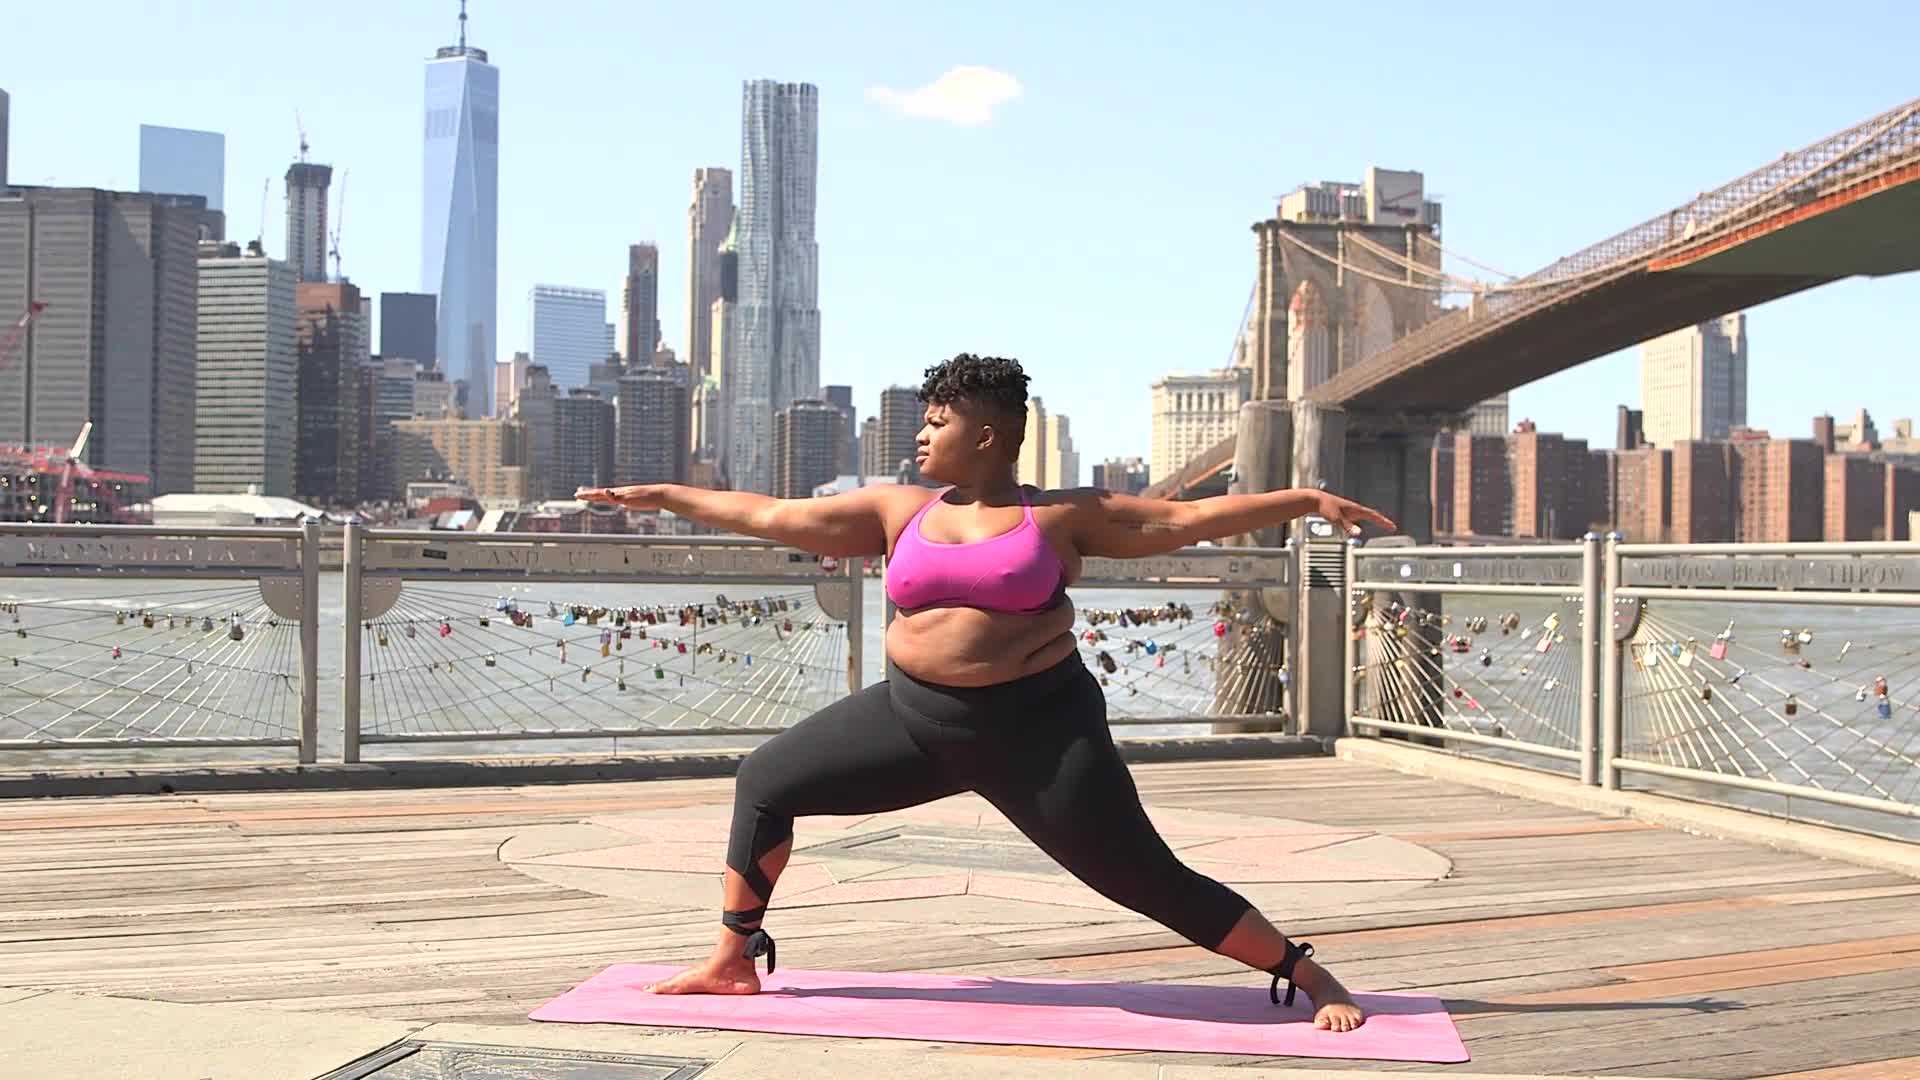 Plus-Size Yoga Teacher Shatters Fit Body Stereotypes in Powerful Video